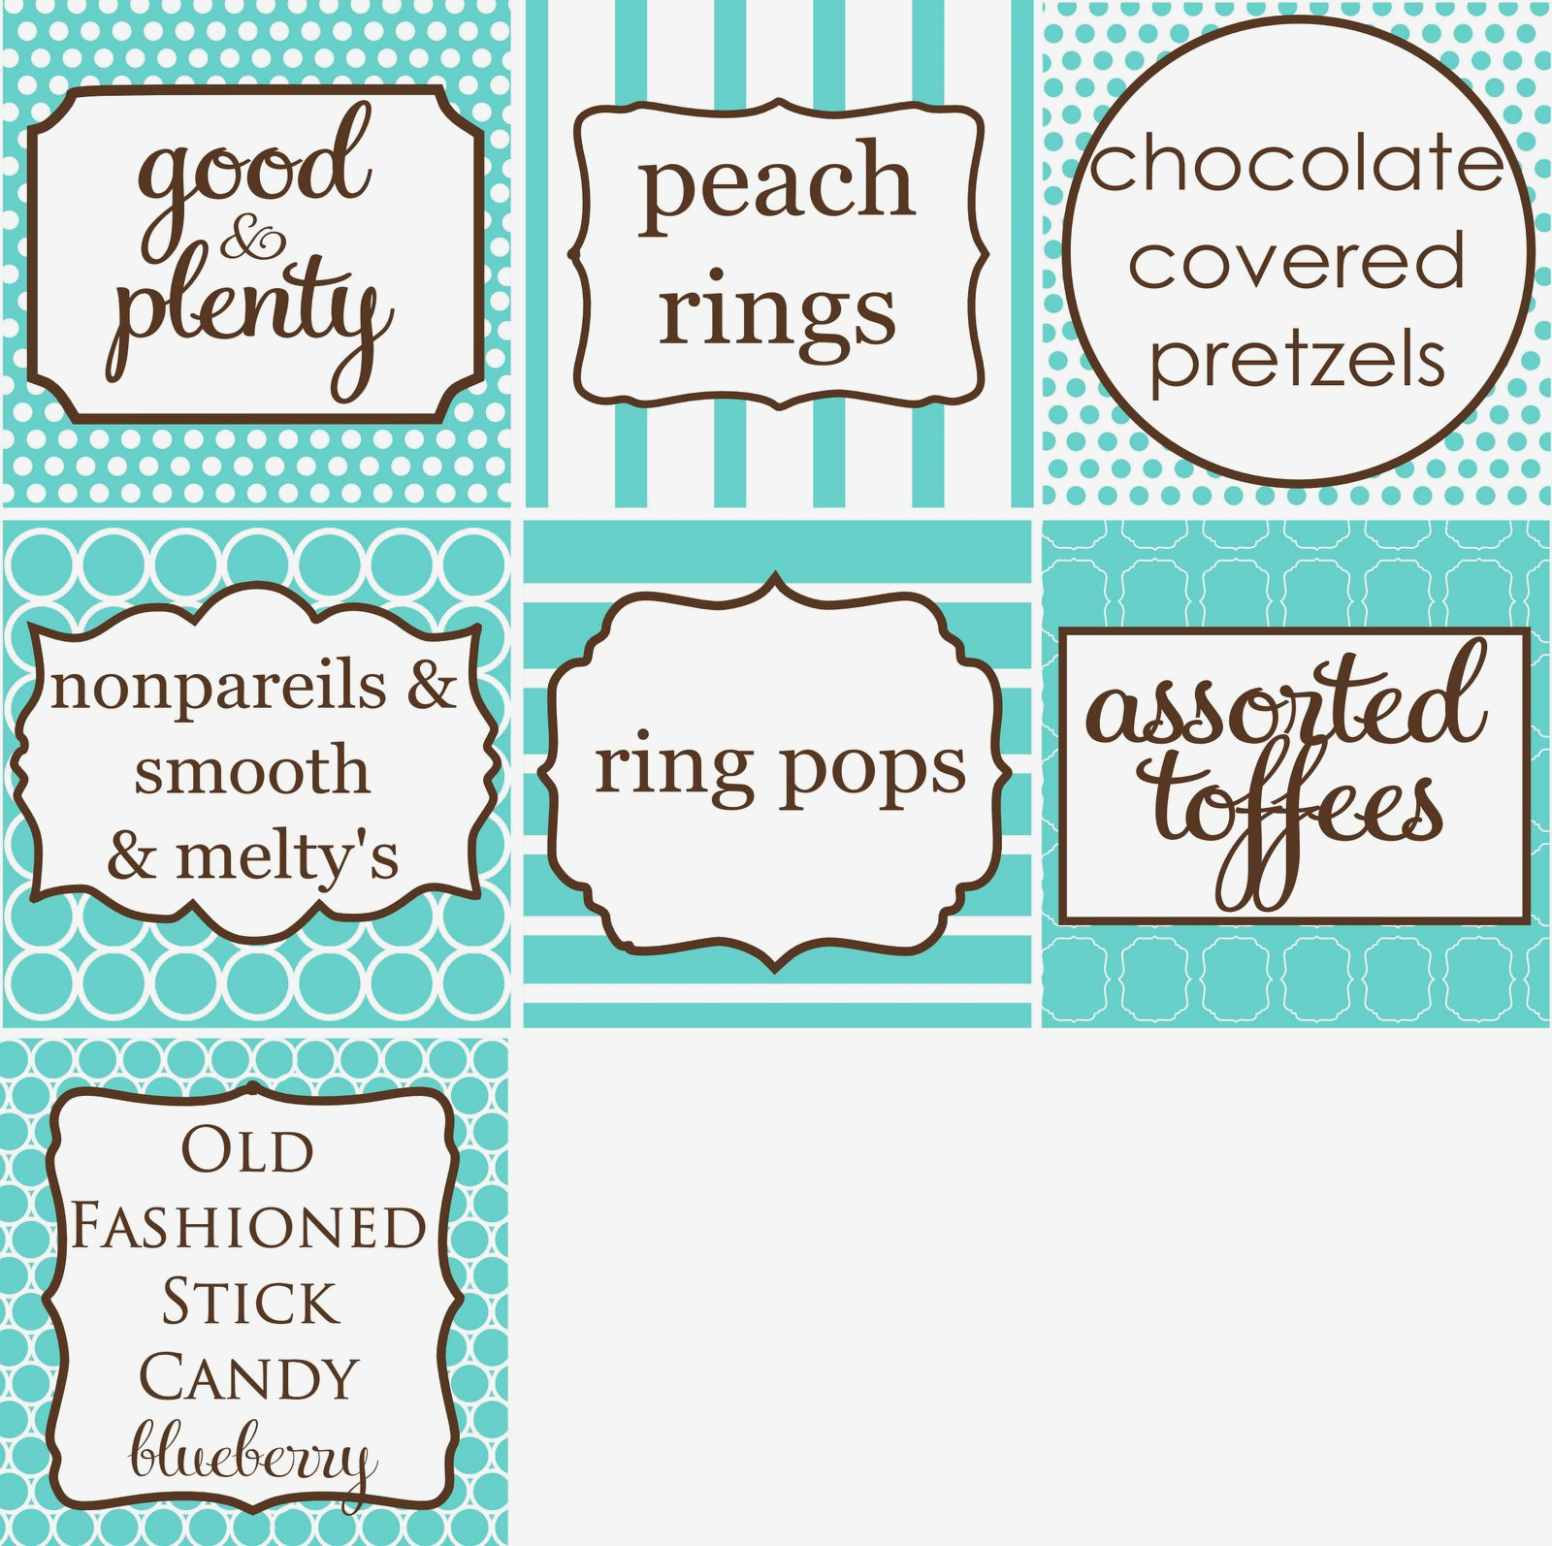 Free Printable Candy Buffet Labels Templates Download Now Index Of - Free Printable Candy Buffet Labels Templates